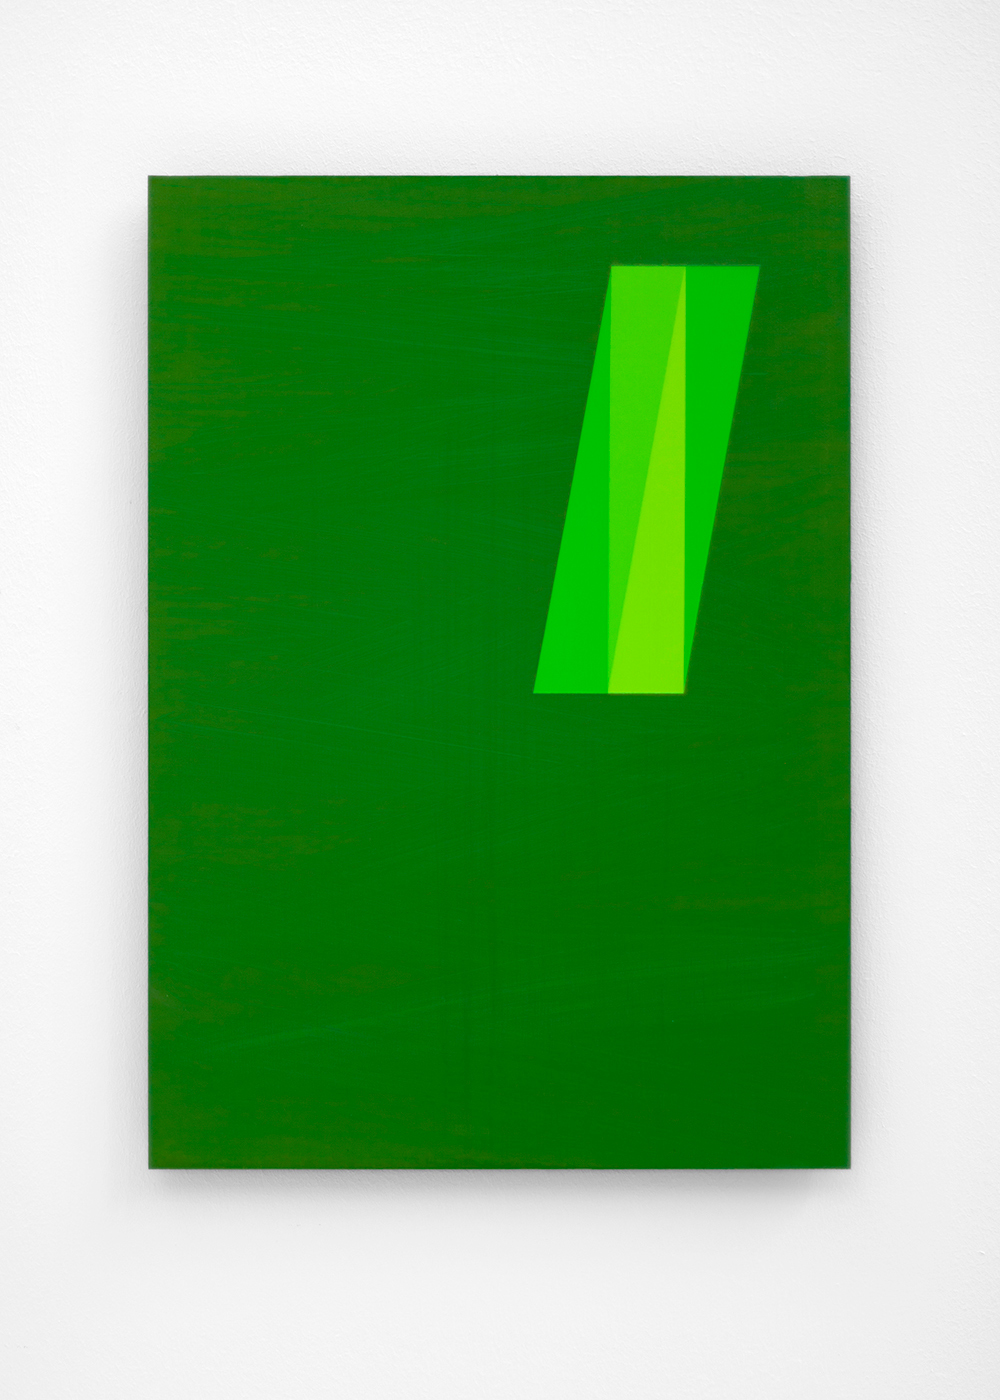  Anders Sletvold Moe.  The Green Series # 16 , 2018. Oil and acrylic on plexi glass. 11.69 x 16.53 inches     